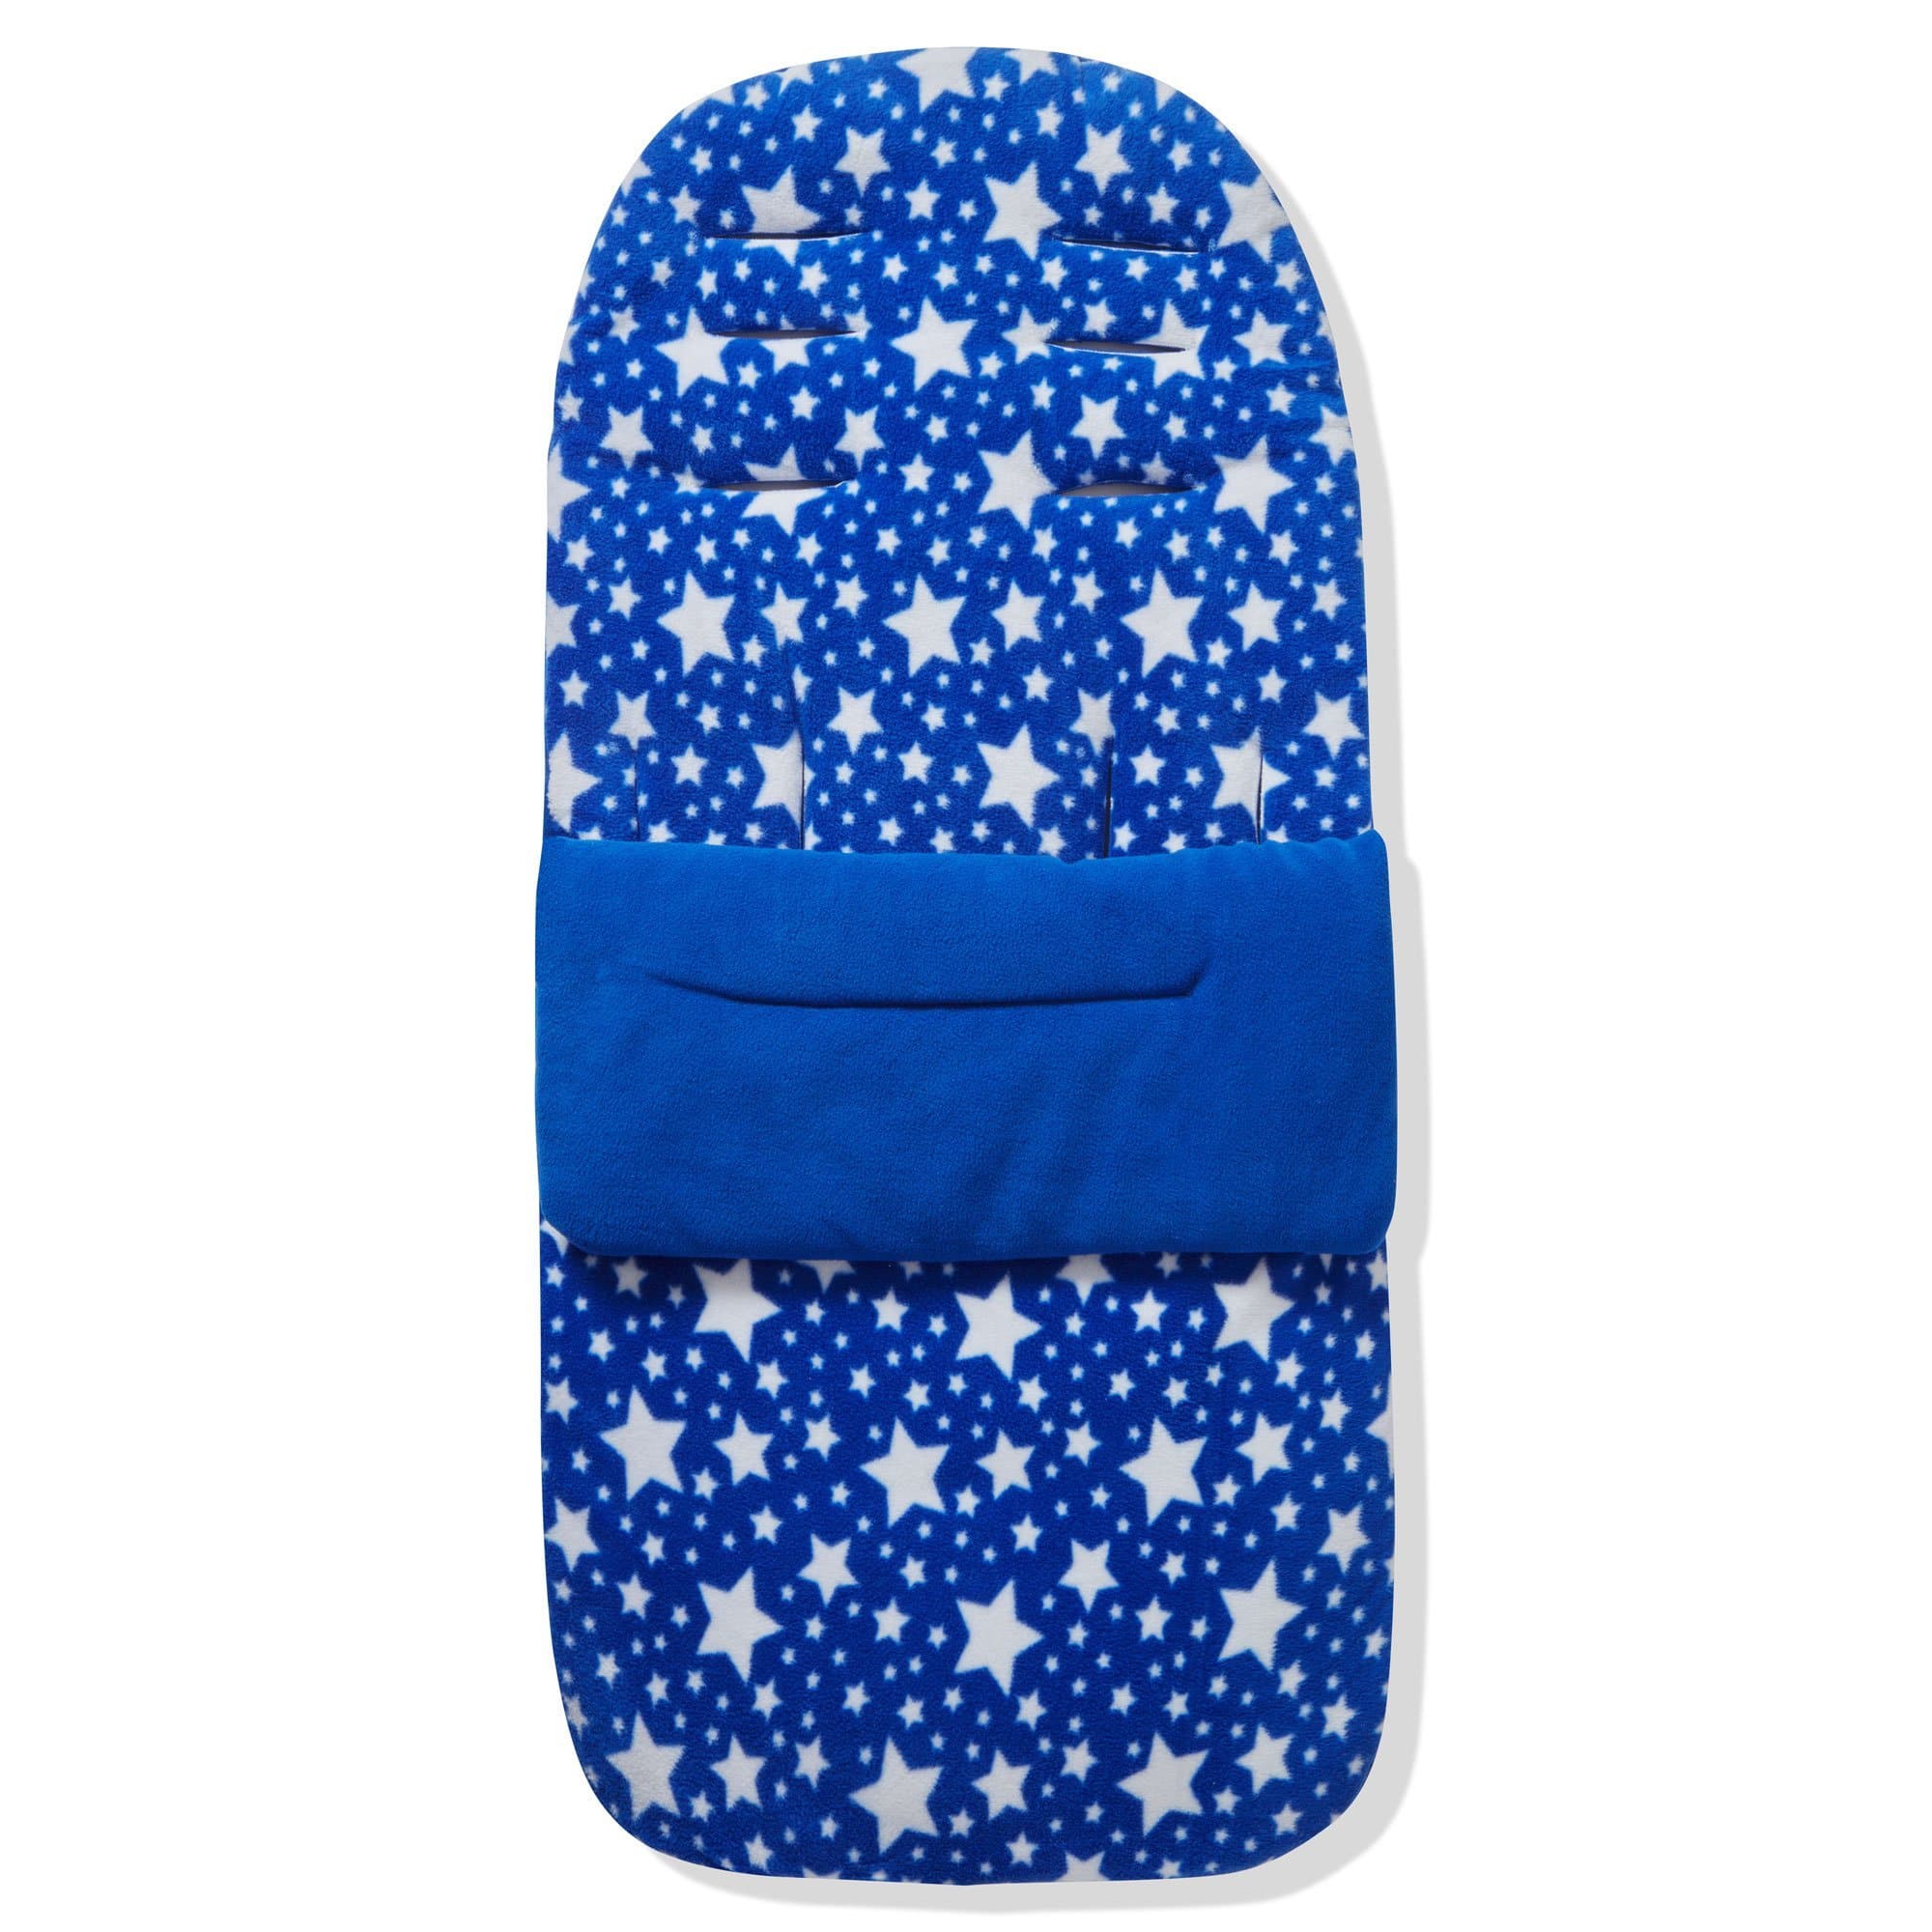 Fleece Footmuff / Cosy Toes Compatible With Brevi - For Your Little One